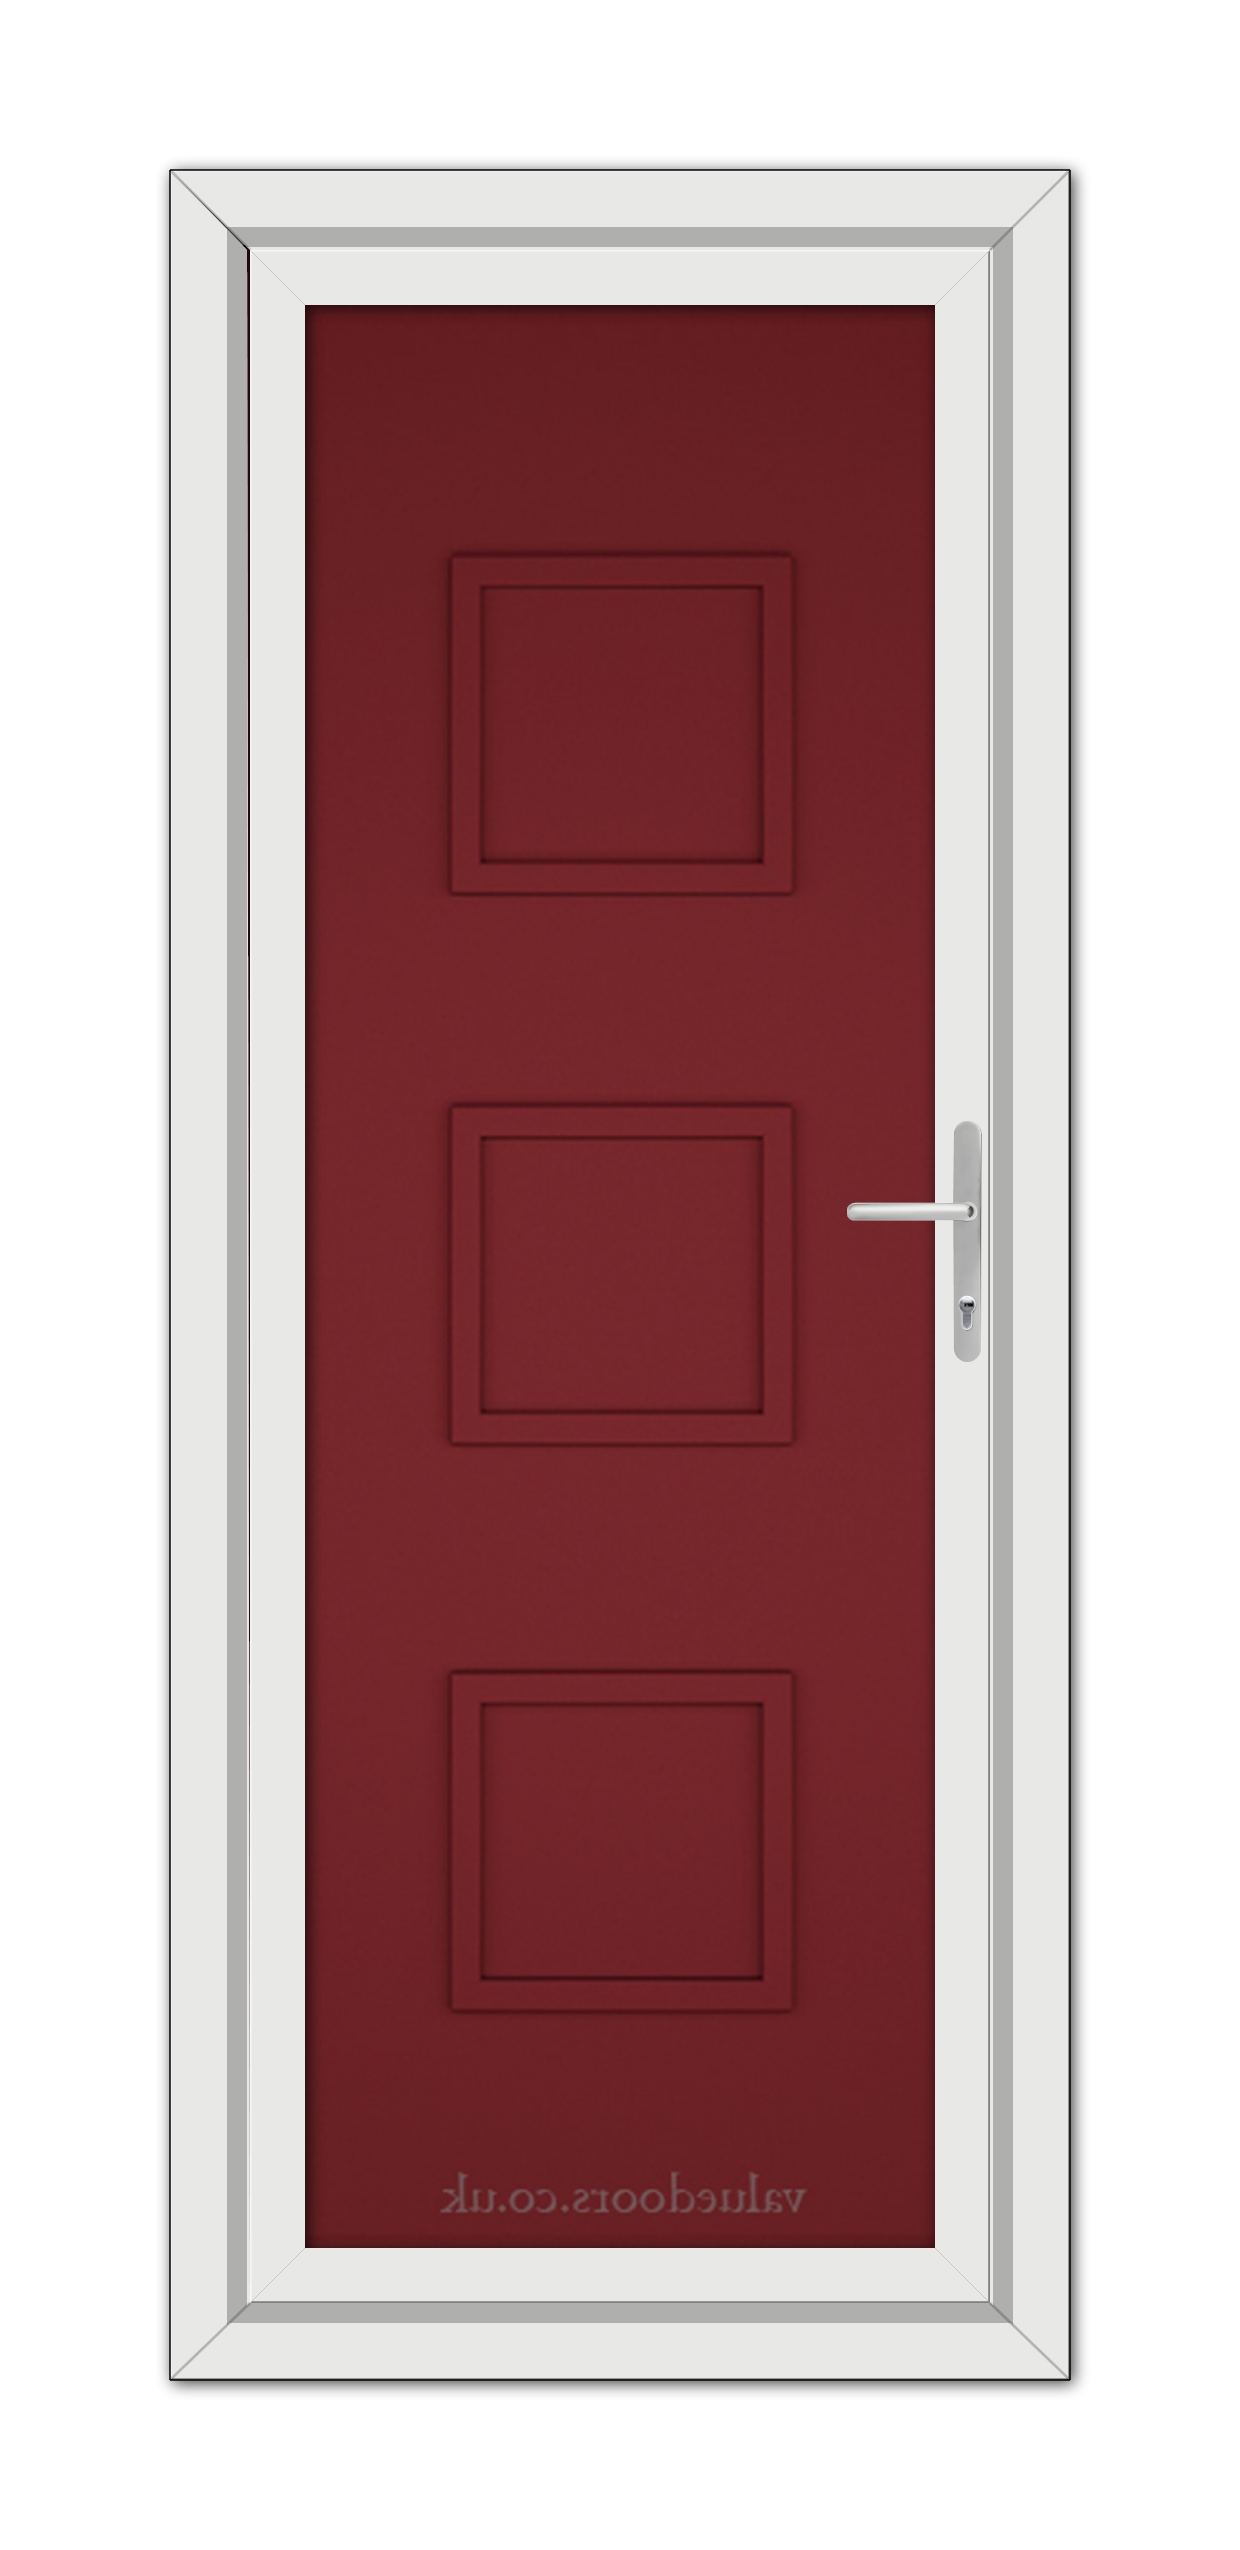 A Red Modern 5013 Solid uPVC Door with white trim.